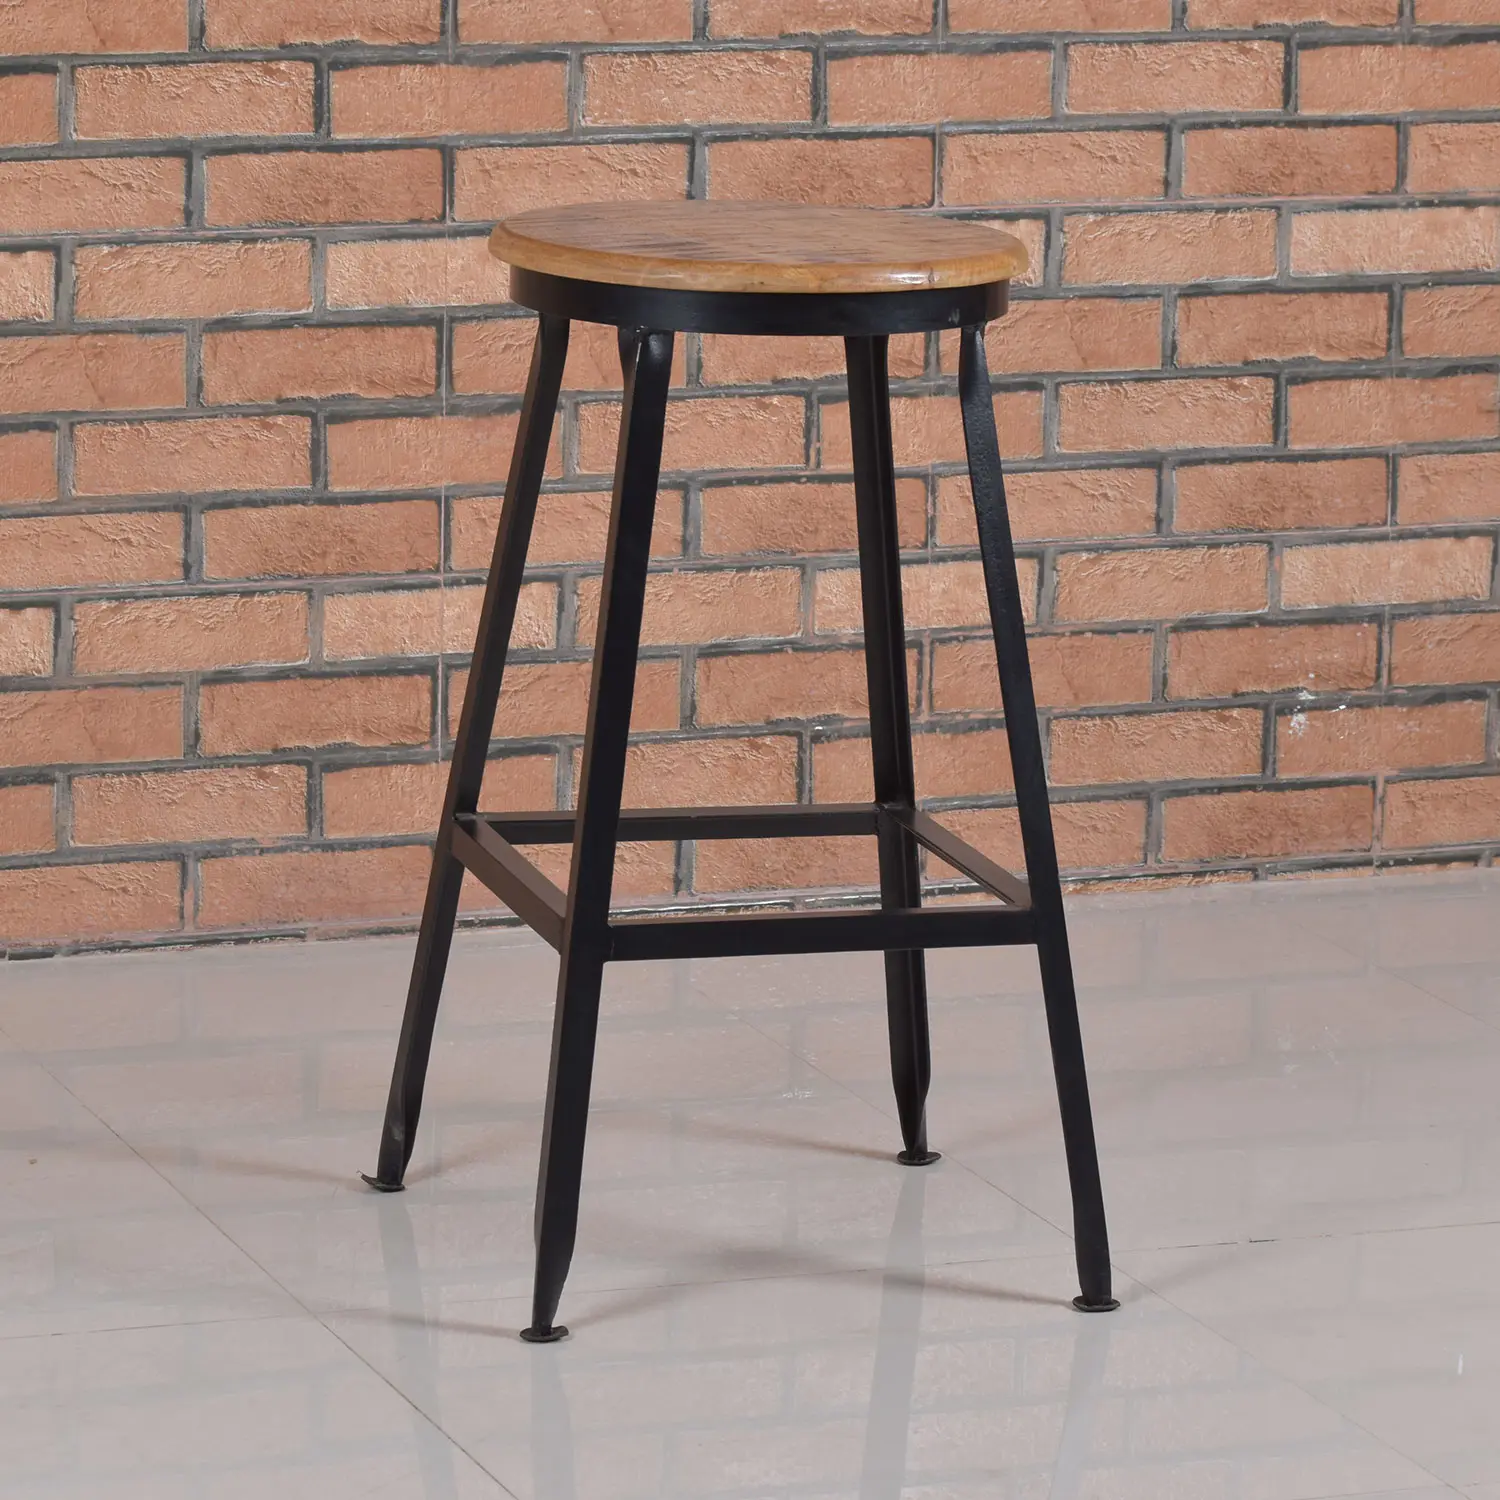 Iron Bar Stool with Wooden Seat (Top will be Knock Down) - popular handicrafts